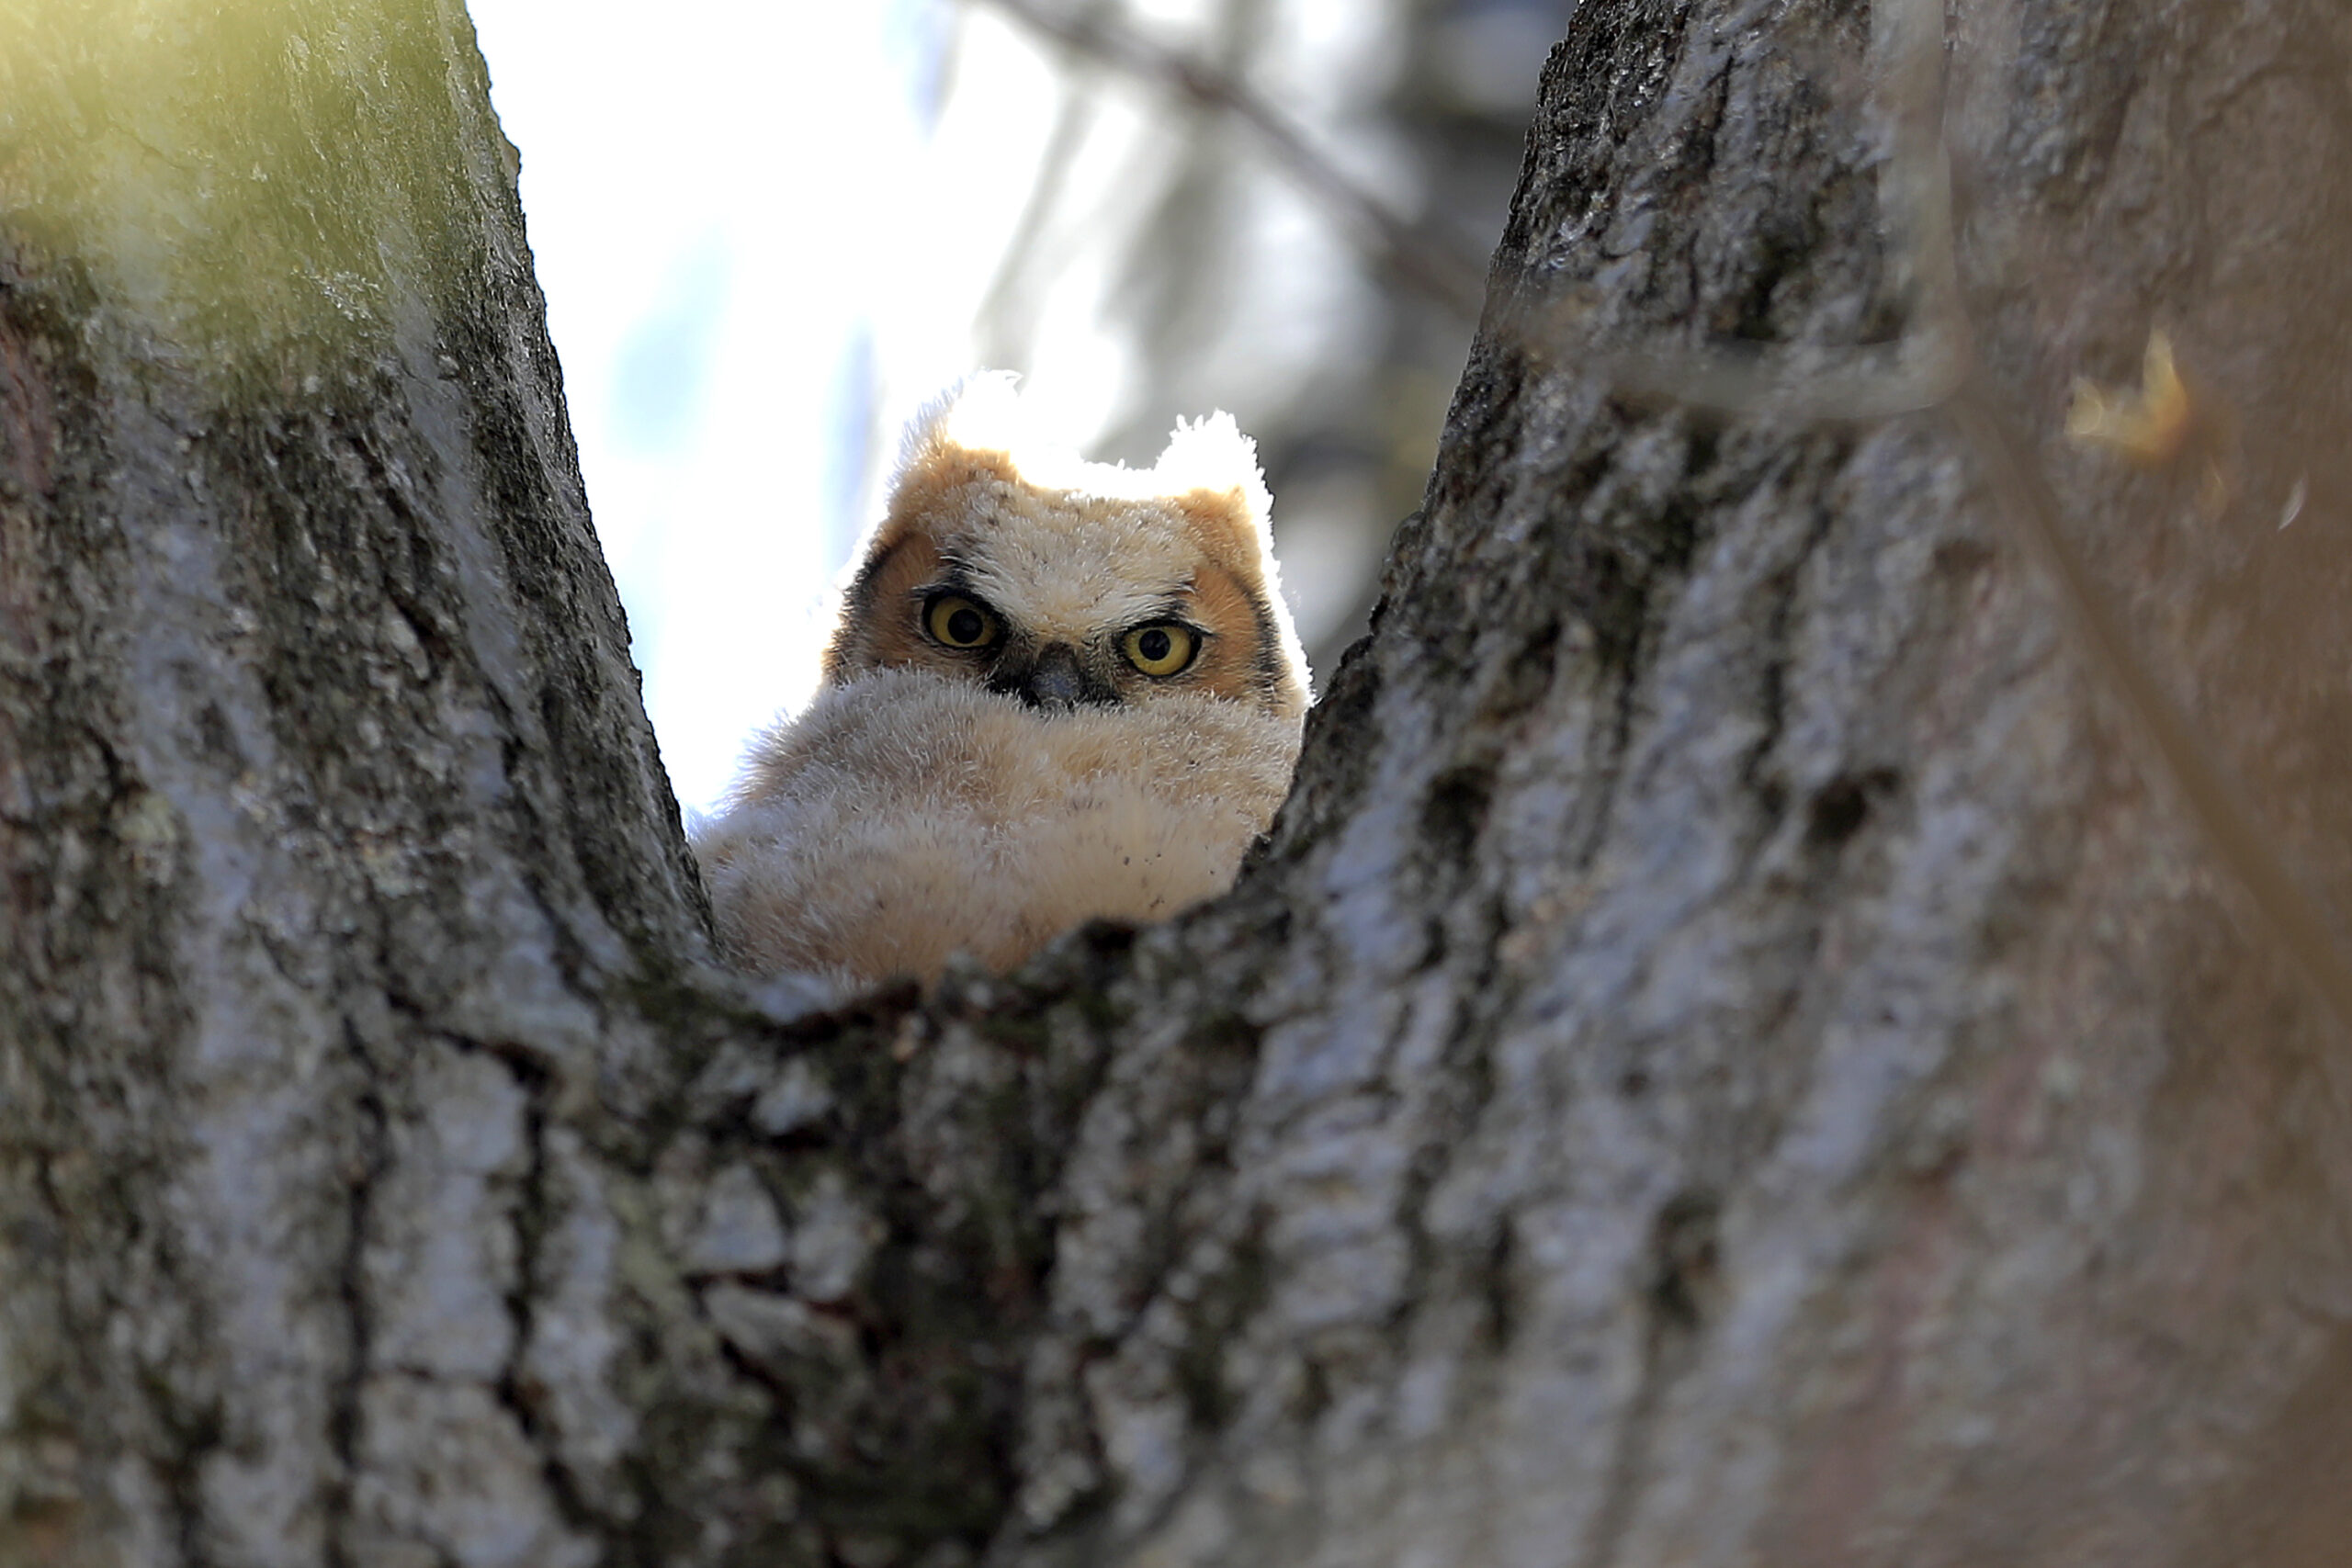 A baby horned owl is seen perched on a tree, Wednesday, April 22, 2020